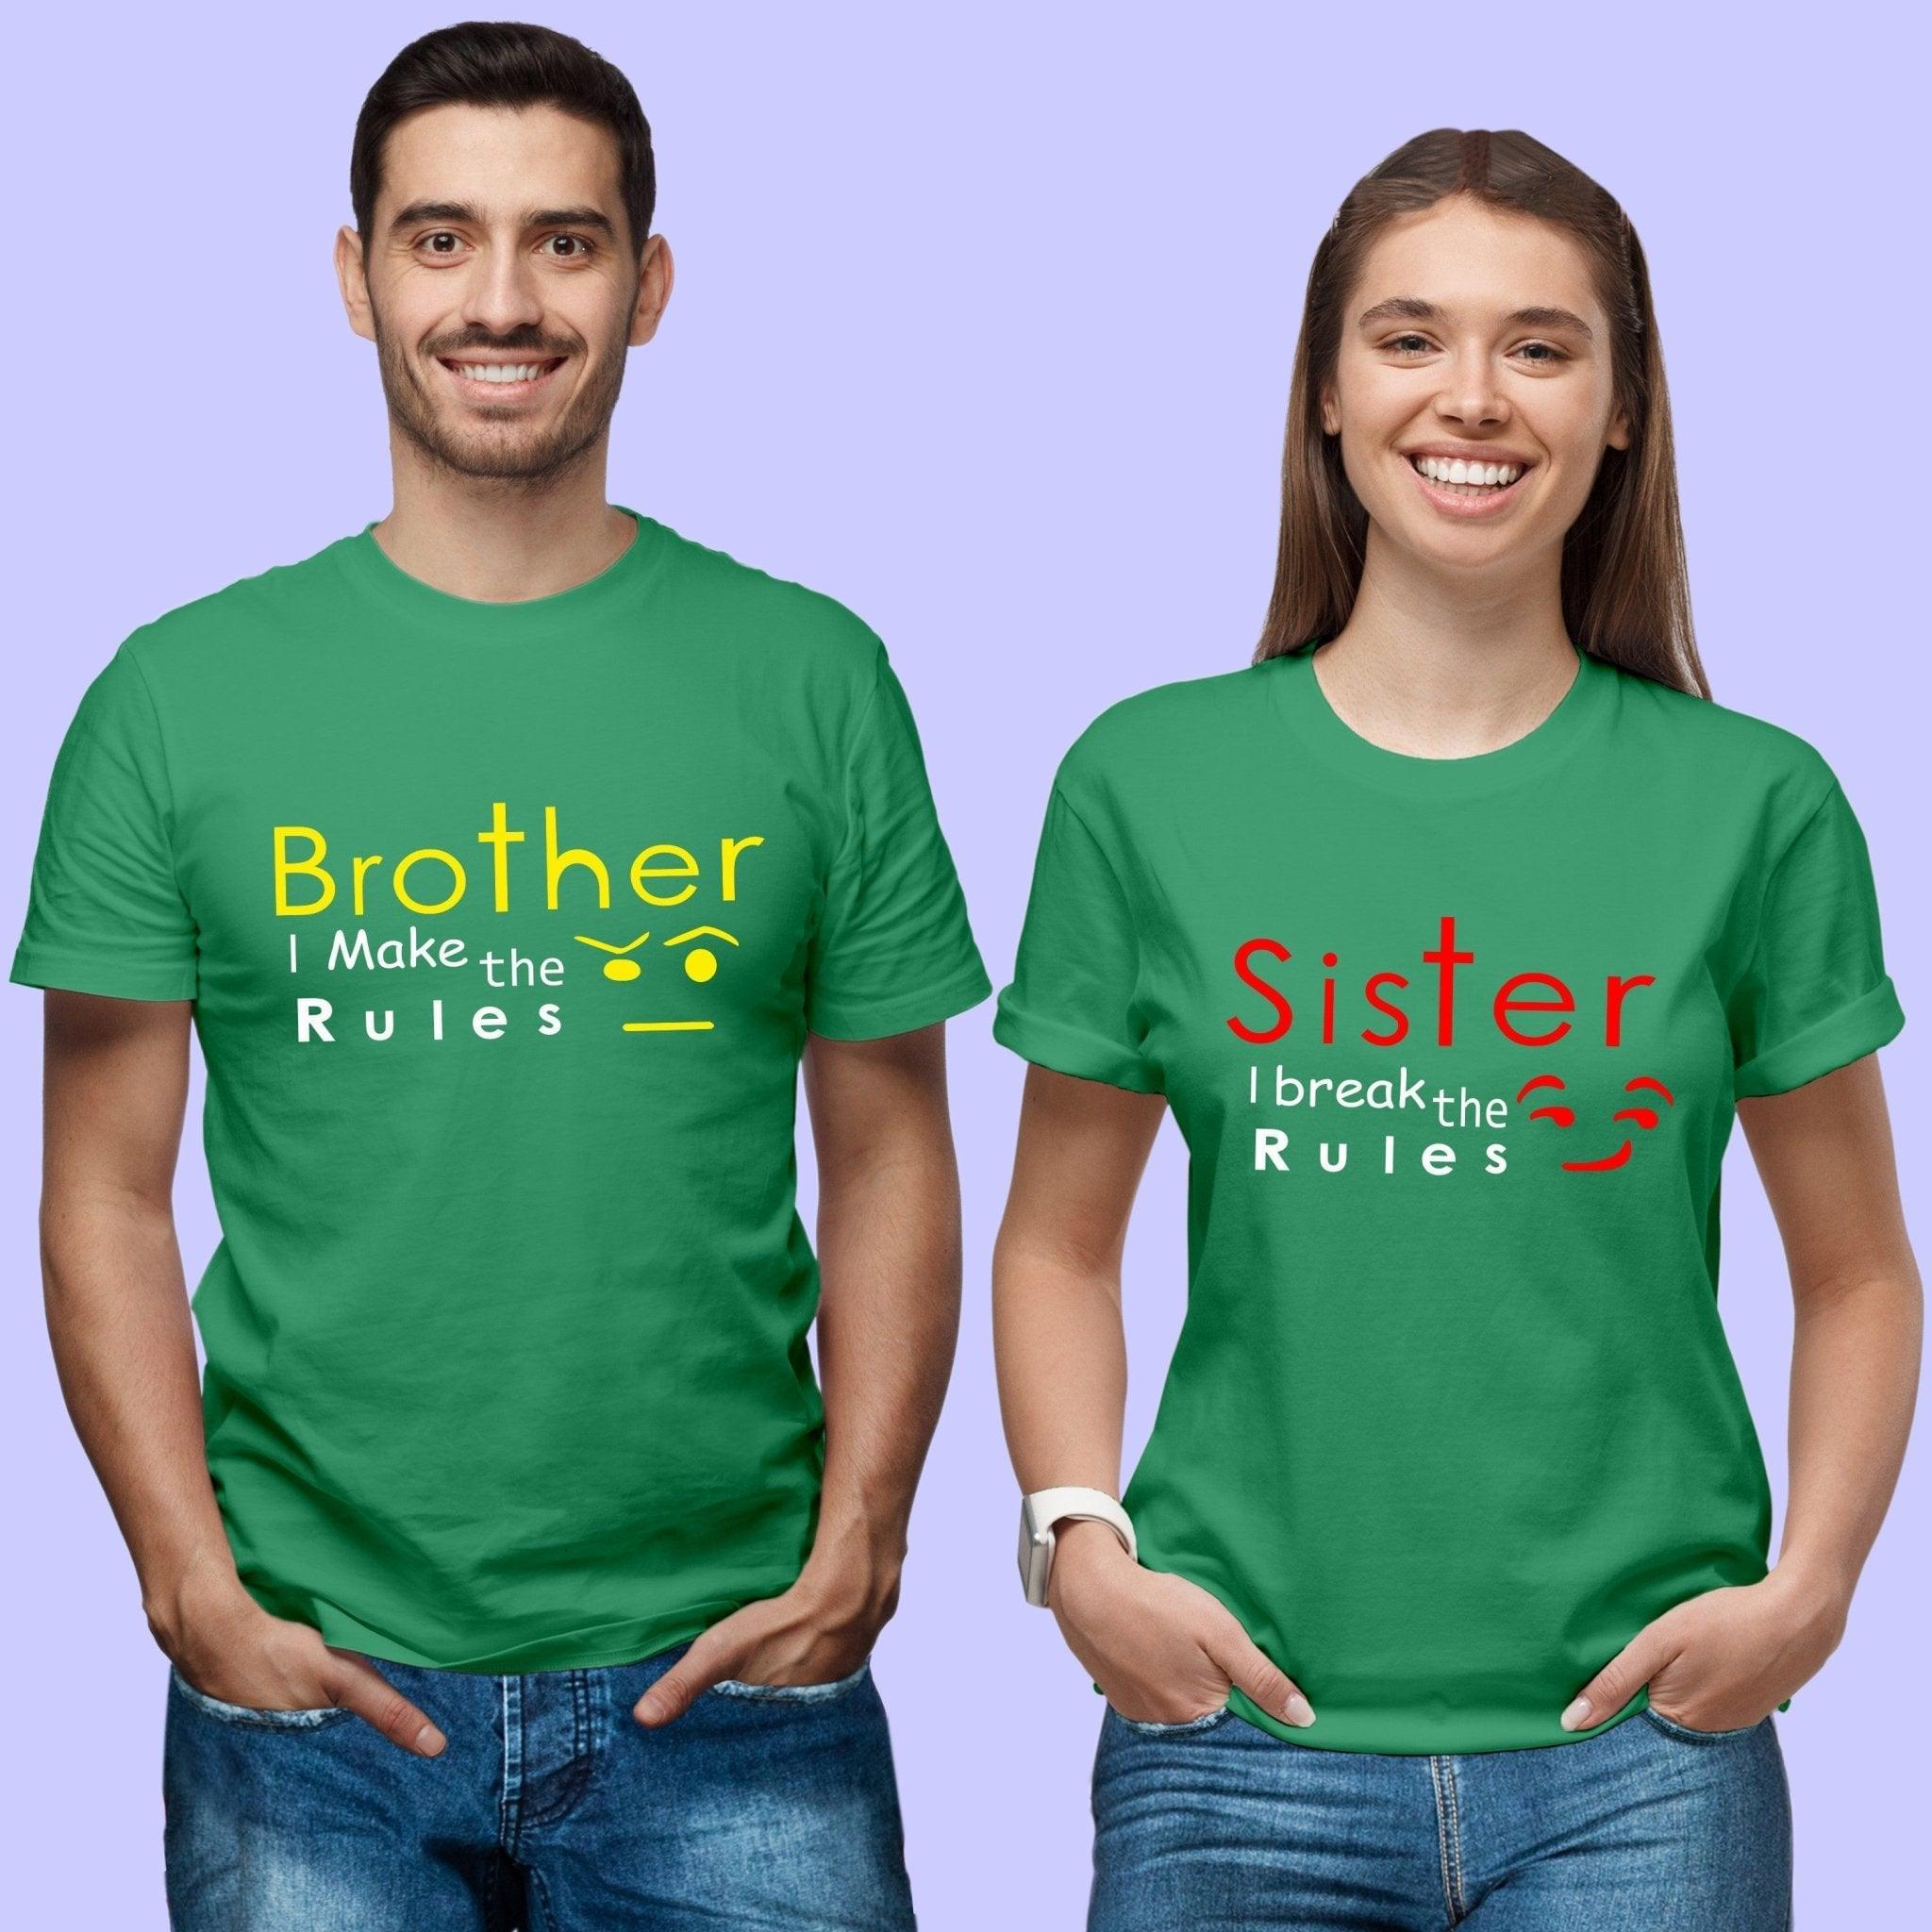 Sibling T Shirt for Adult Brother and Sister in Green Colour - Brother Makes The Rules Sister Breaks The Rules Variant